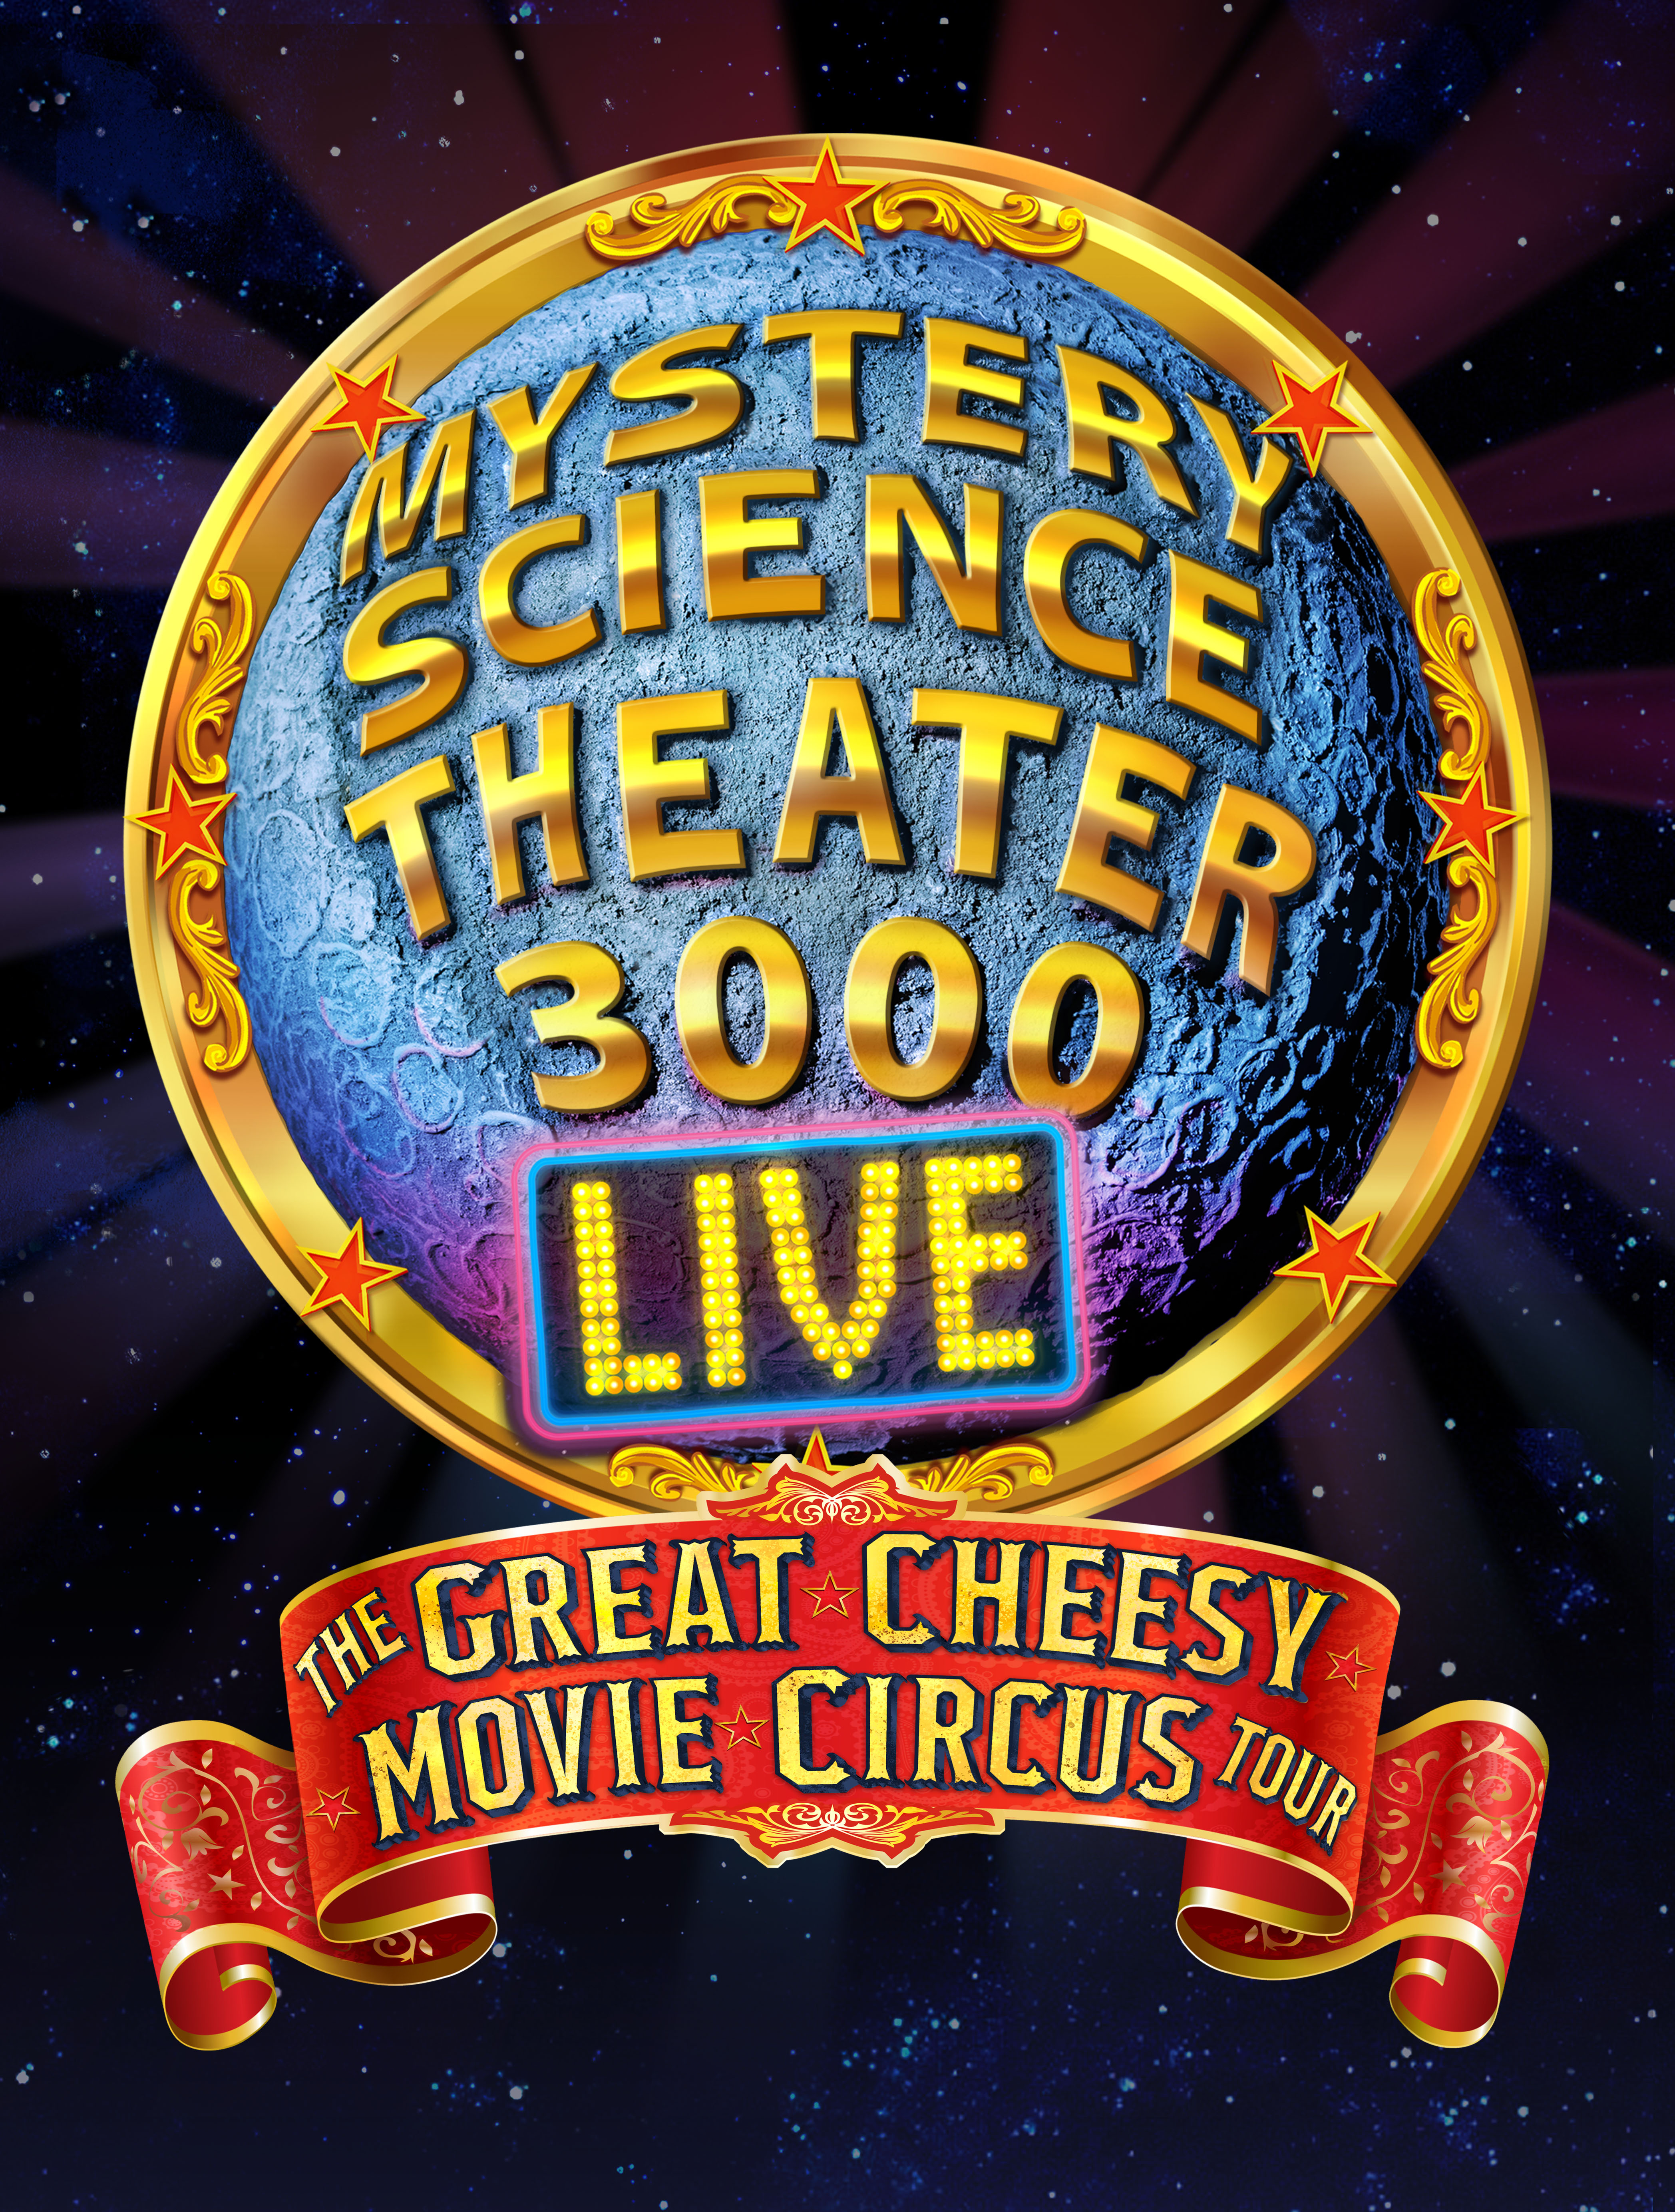 MYSTERY SCIENCE THEATRE 3000 LIVE: THE GREAT CHEESY MOVIE CIRCUS TOUR!